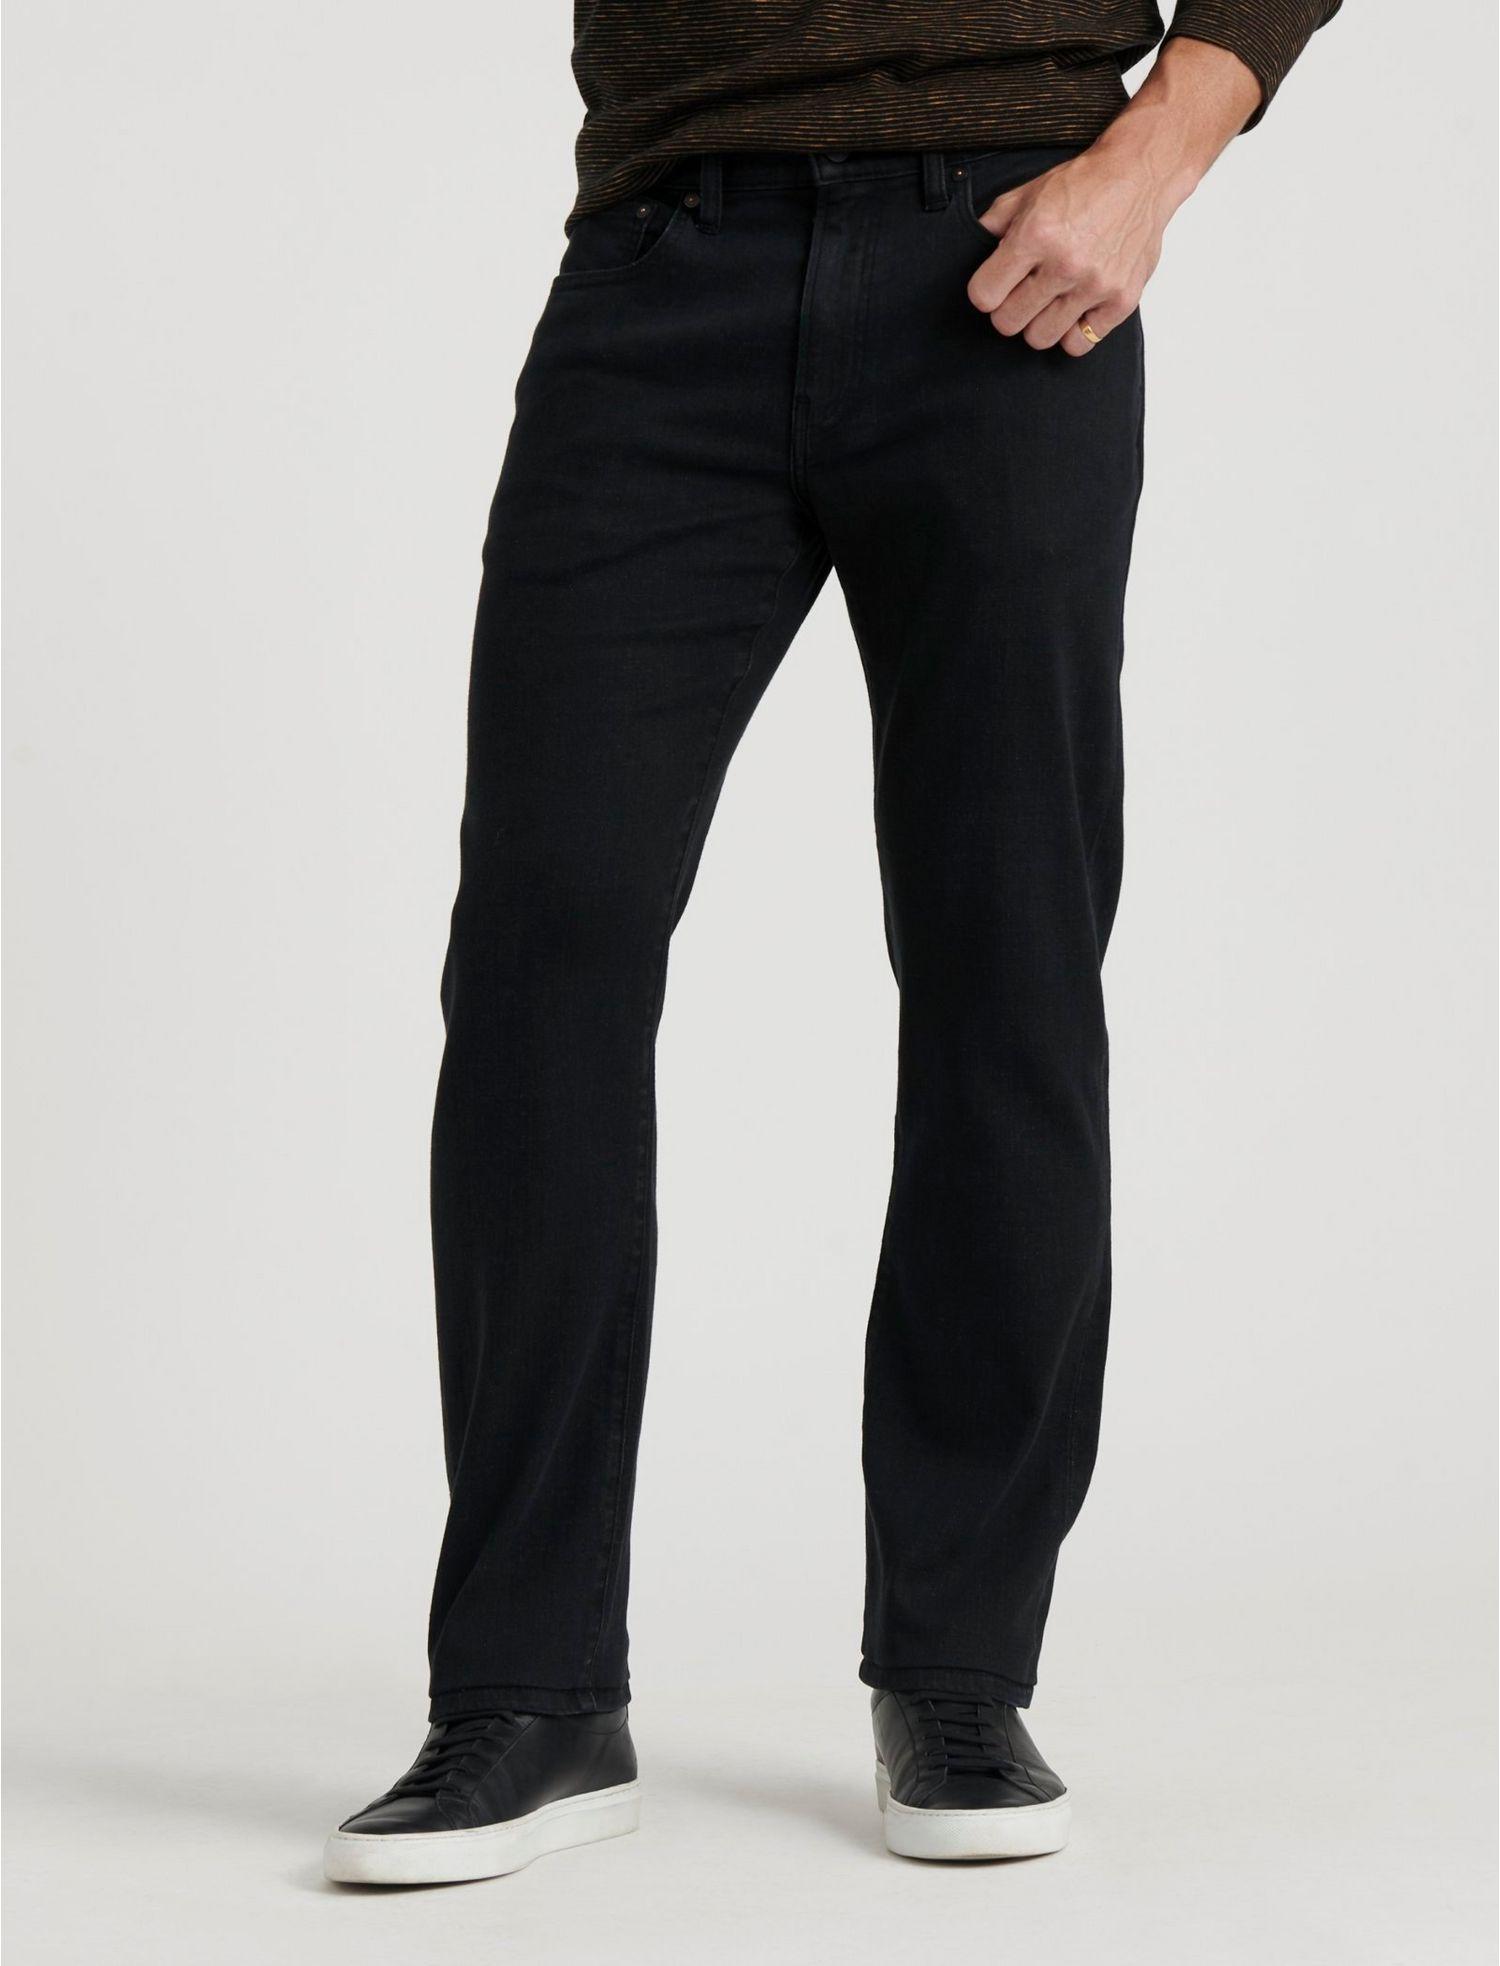 Lucky Brand Cotton 223 Straight Coolmax Jean in Black for Men - Lyst